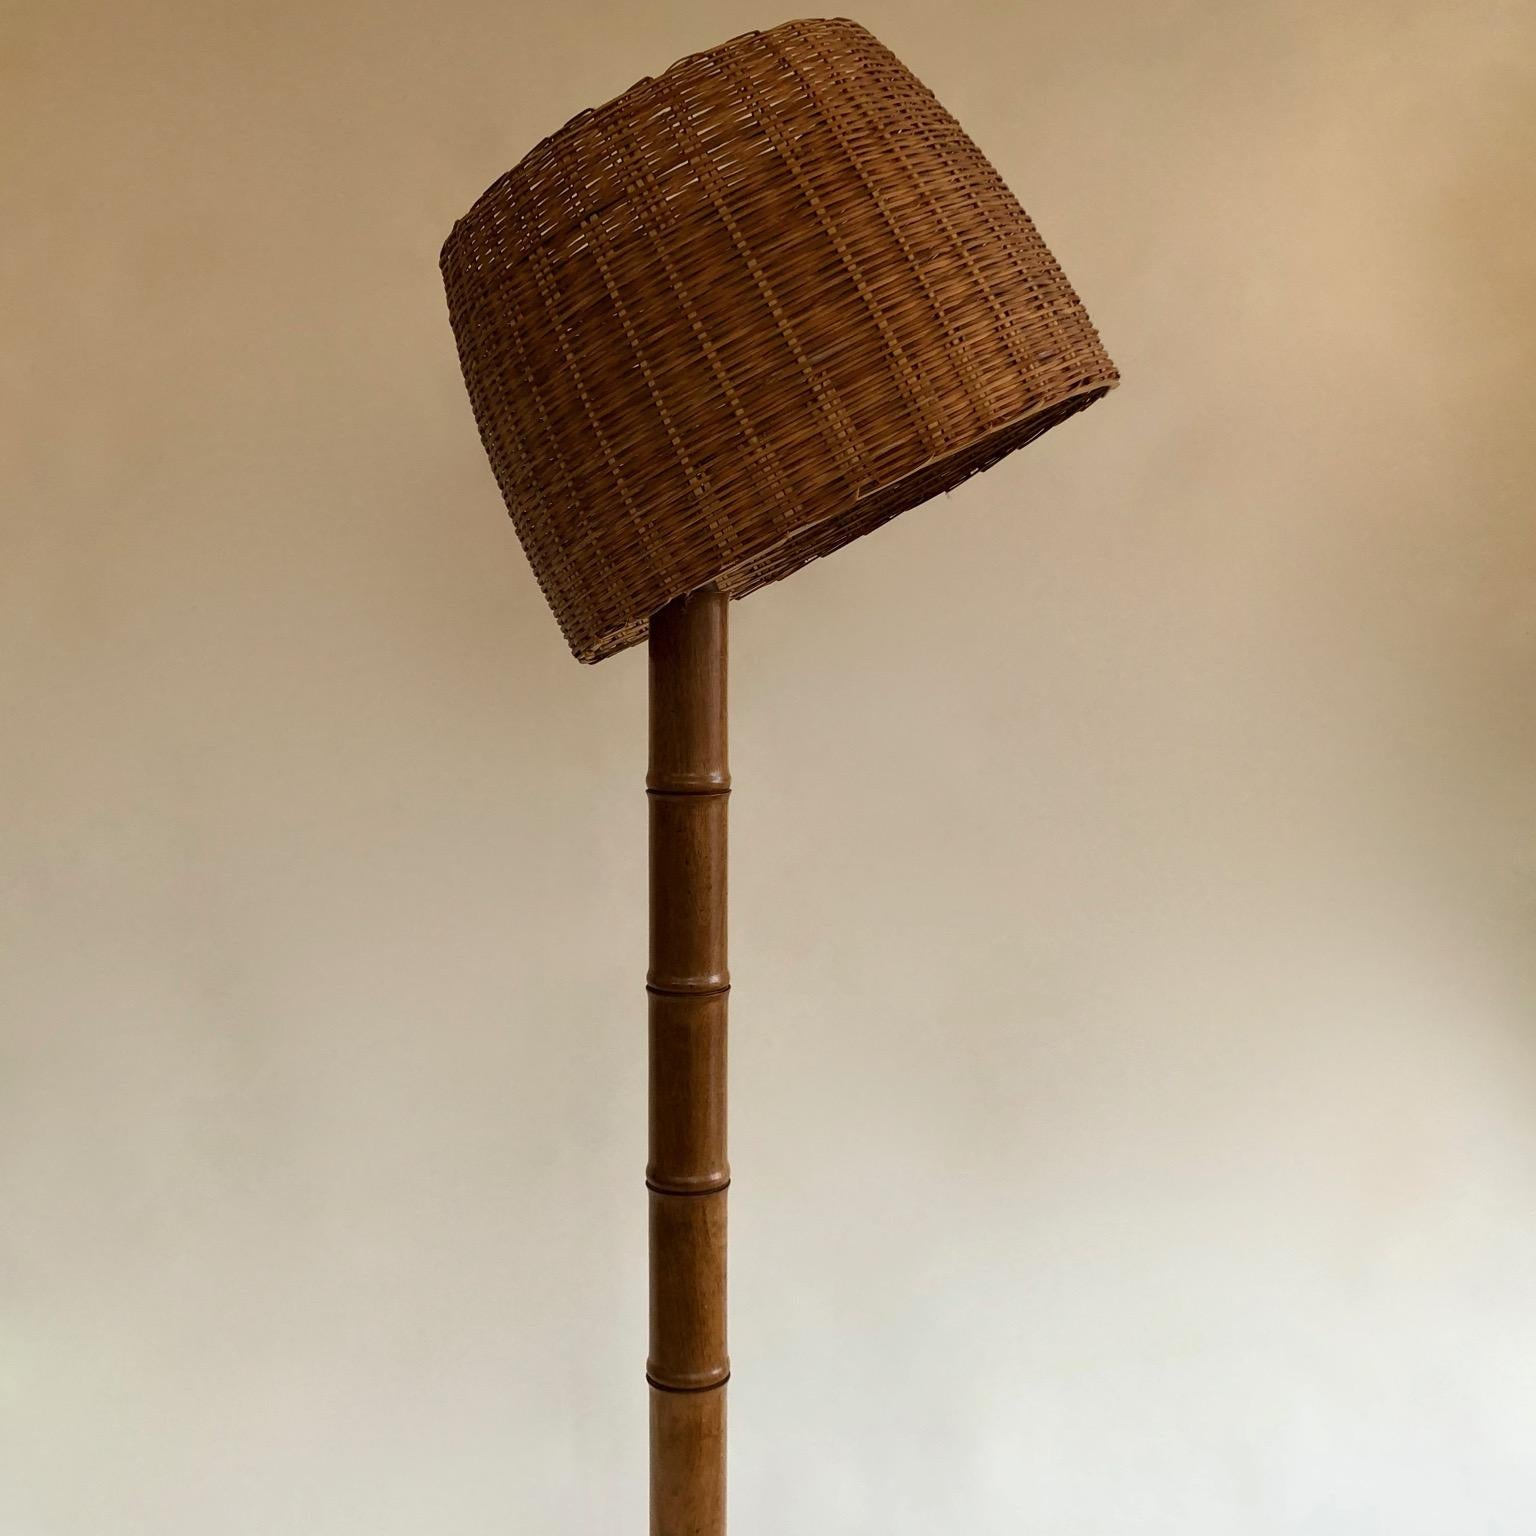 French Wicker Rattan and bamboo shaped wooden floor lamp, Lampadaire 1950s, possibly earlier. Unusual Tilting shade.